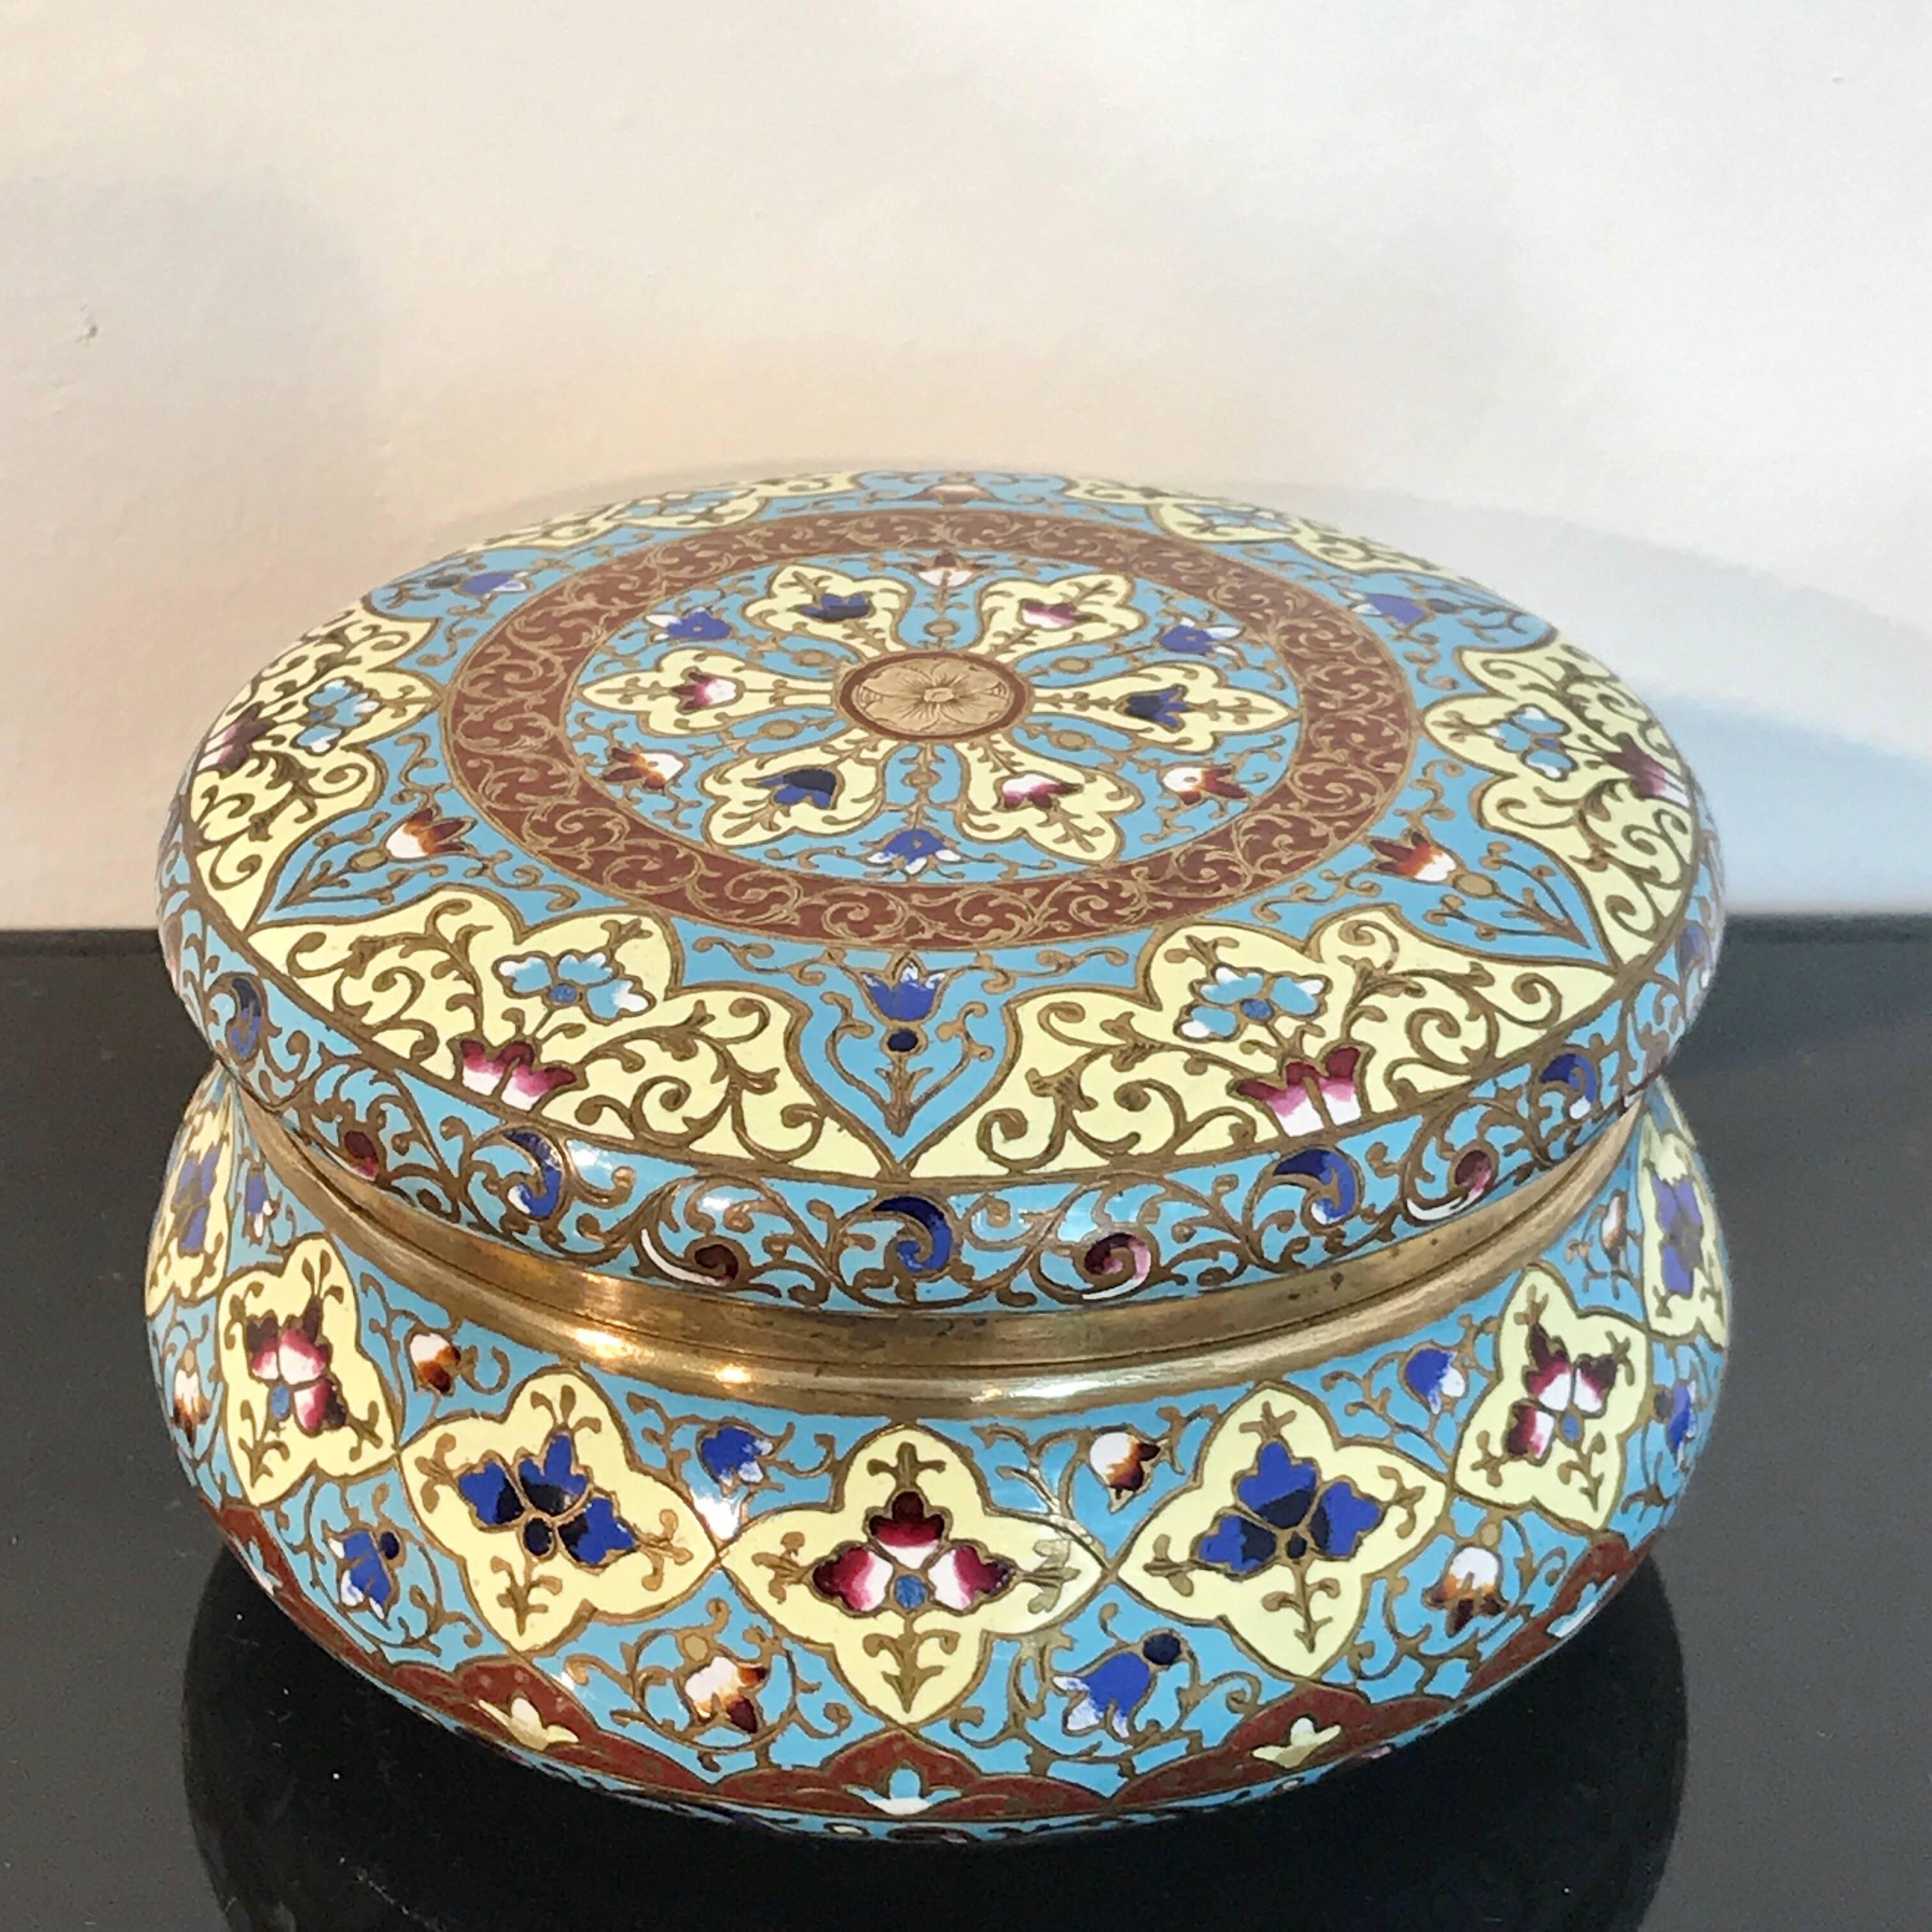 French enamel table box, attributed to F. Barbedienne, with a 5